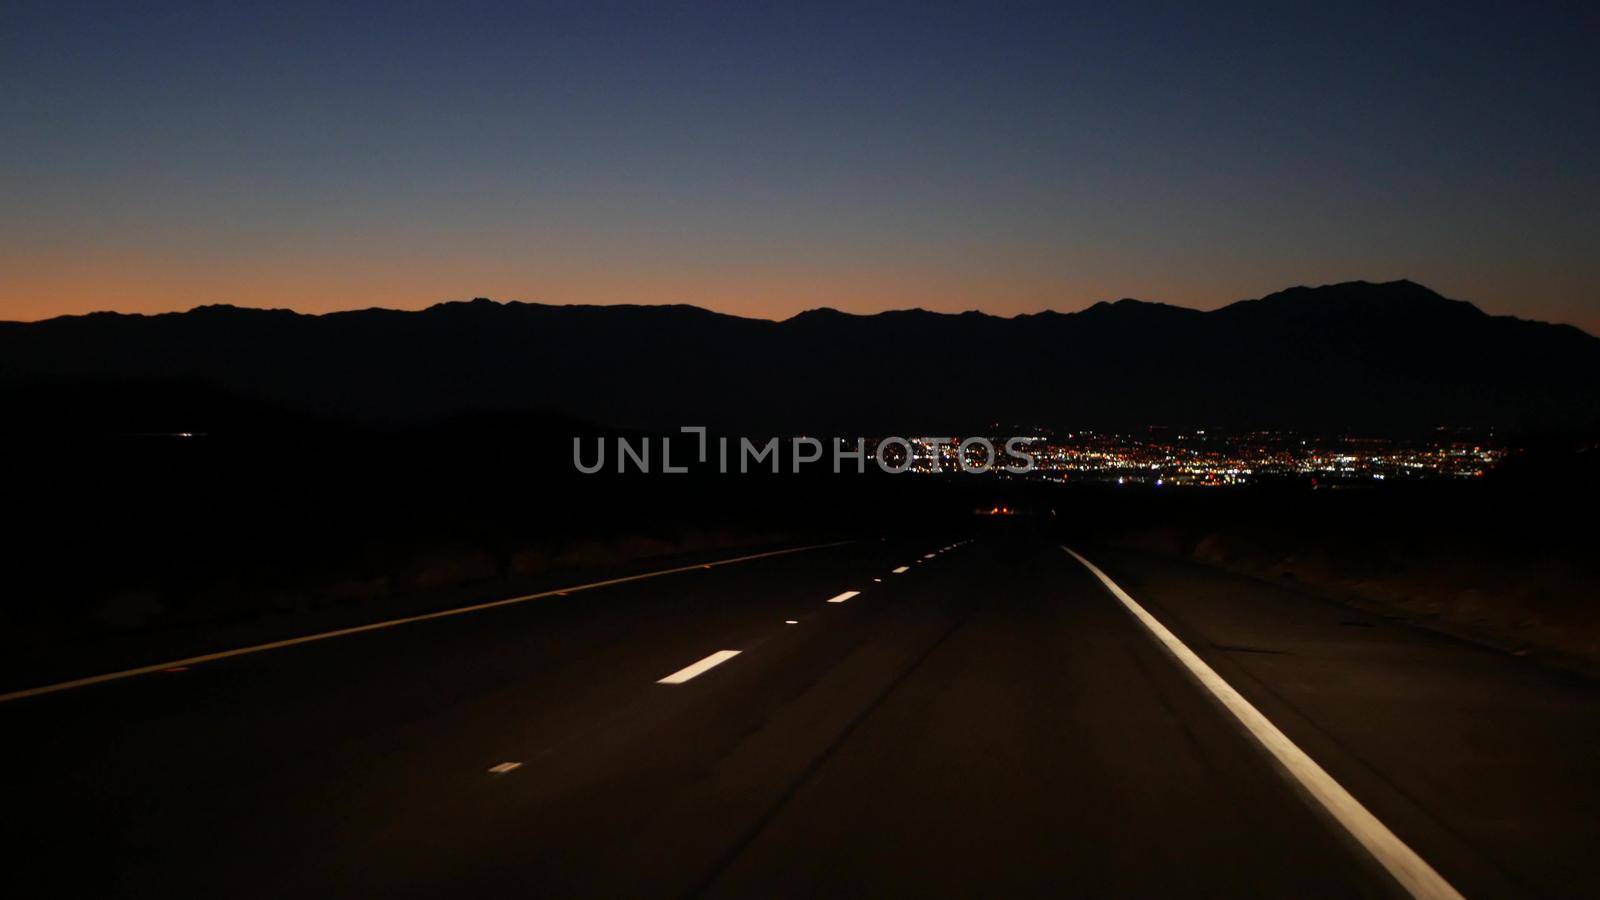 Car driving on desert road at night, freeway or highway in twilight dusk, perspective view thru windscreen or windshield. Road trip in California USA. Valley and mountains on horizon, dividing line.